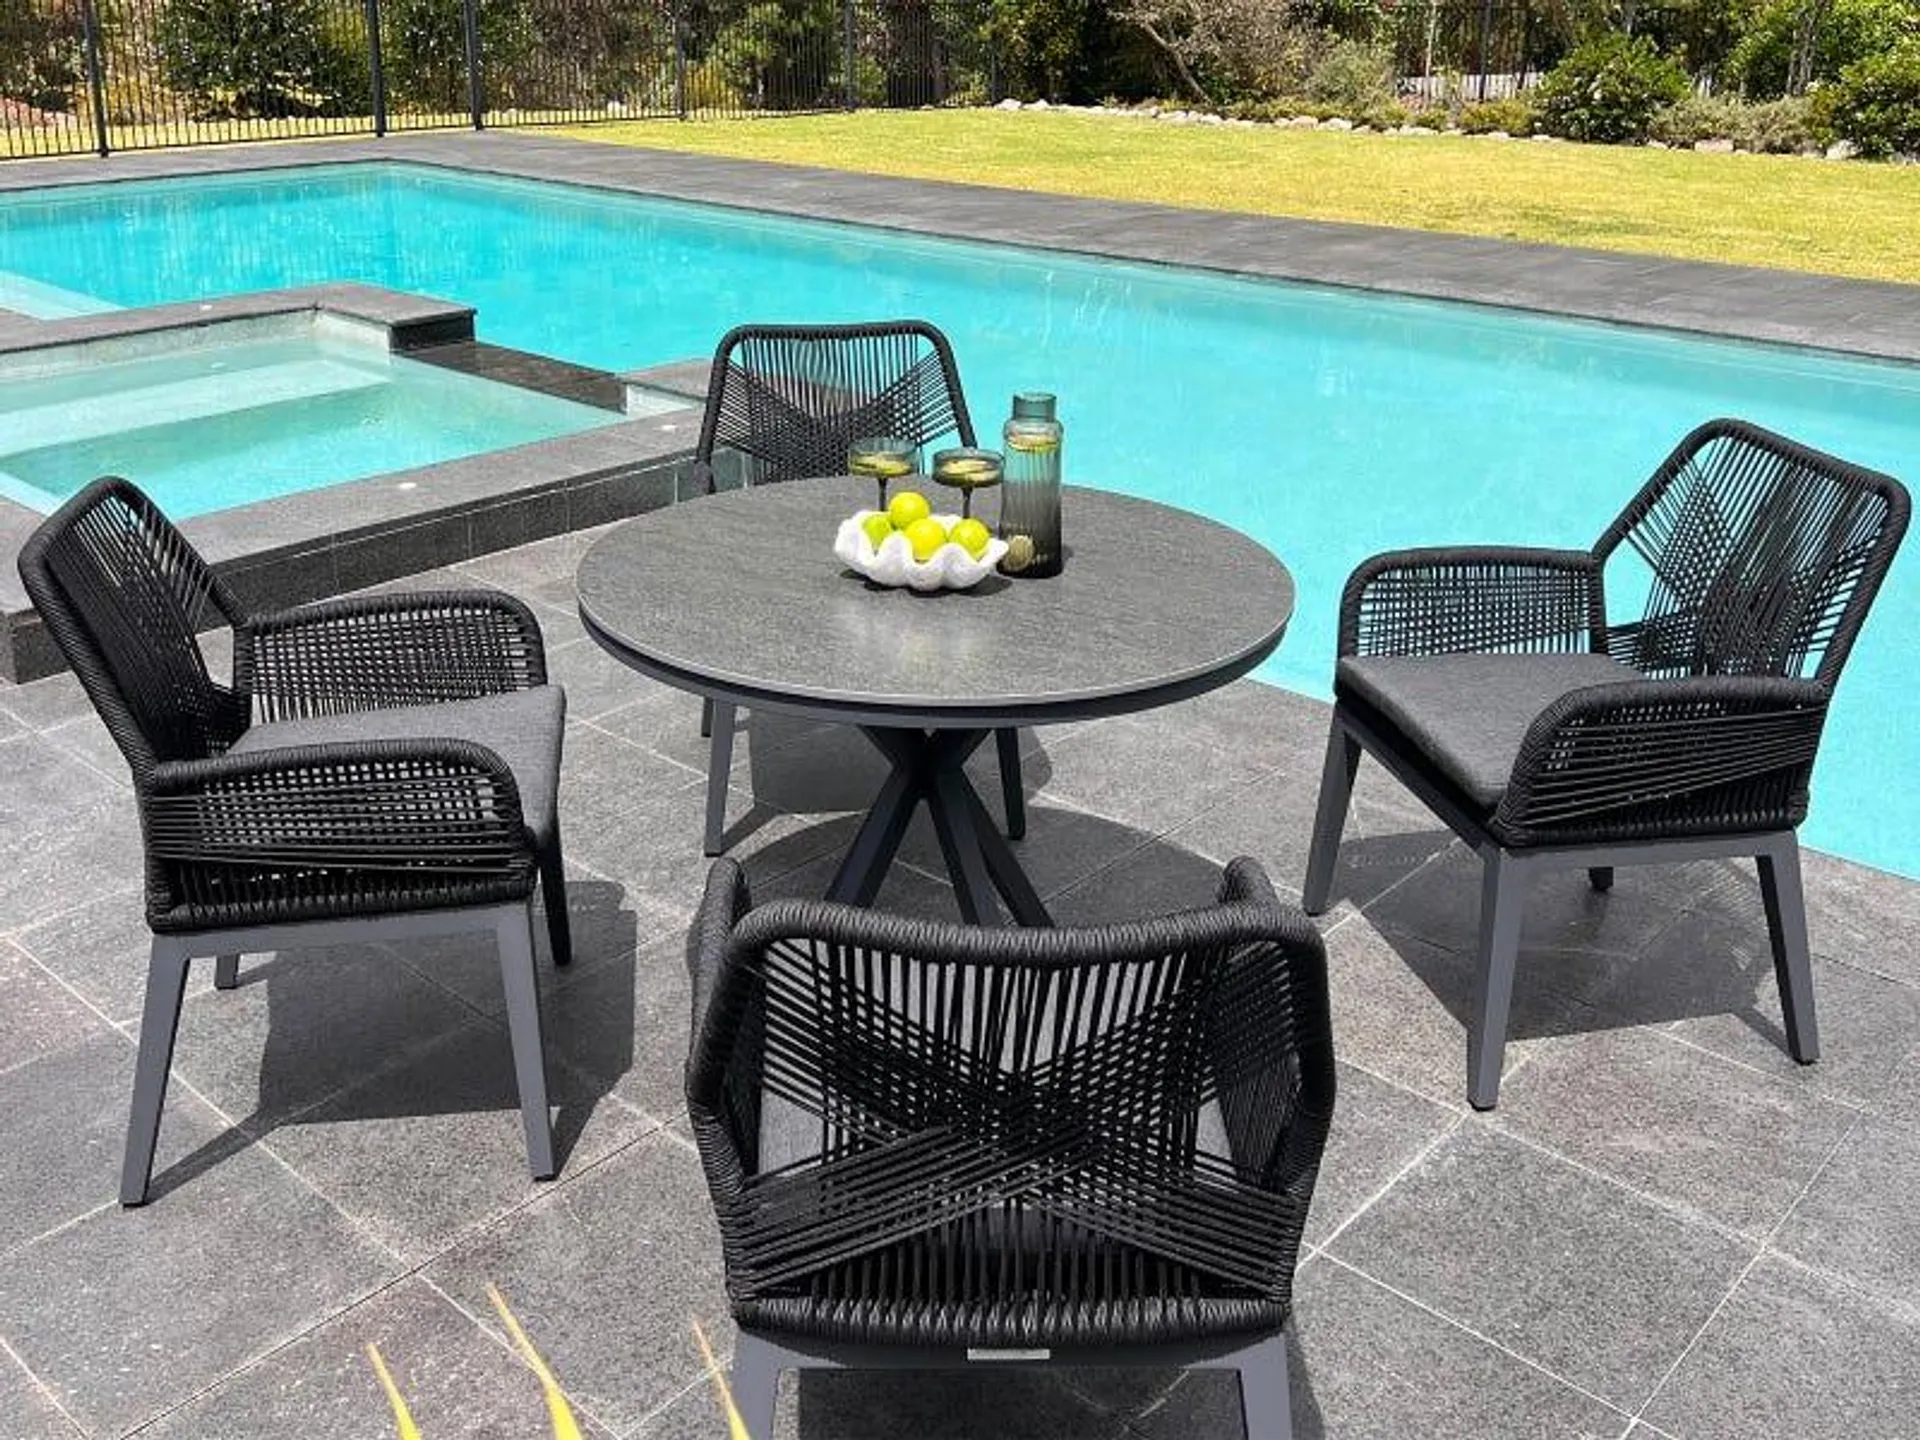 Adele Round Ceramic Table with Serang Chairs 5pc Outdoor Dining Setting